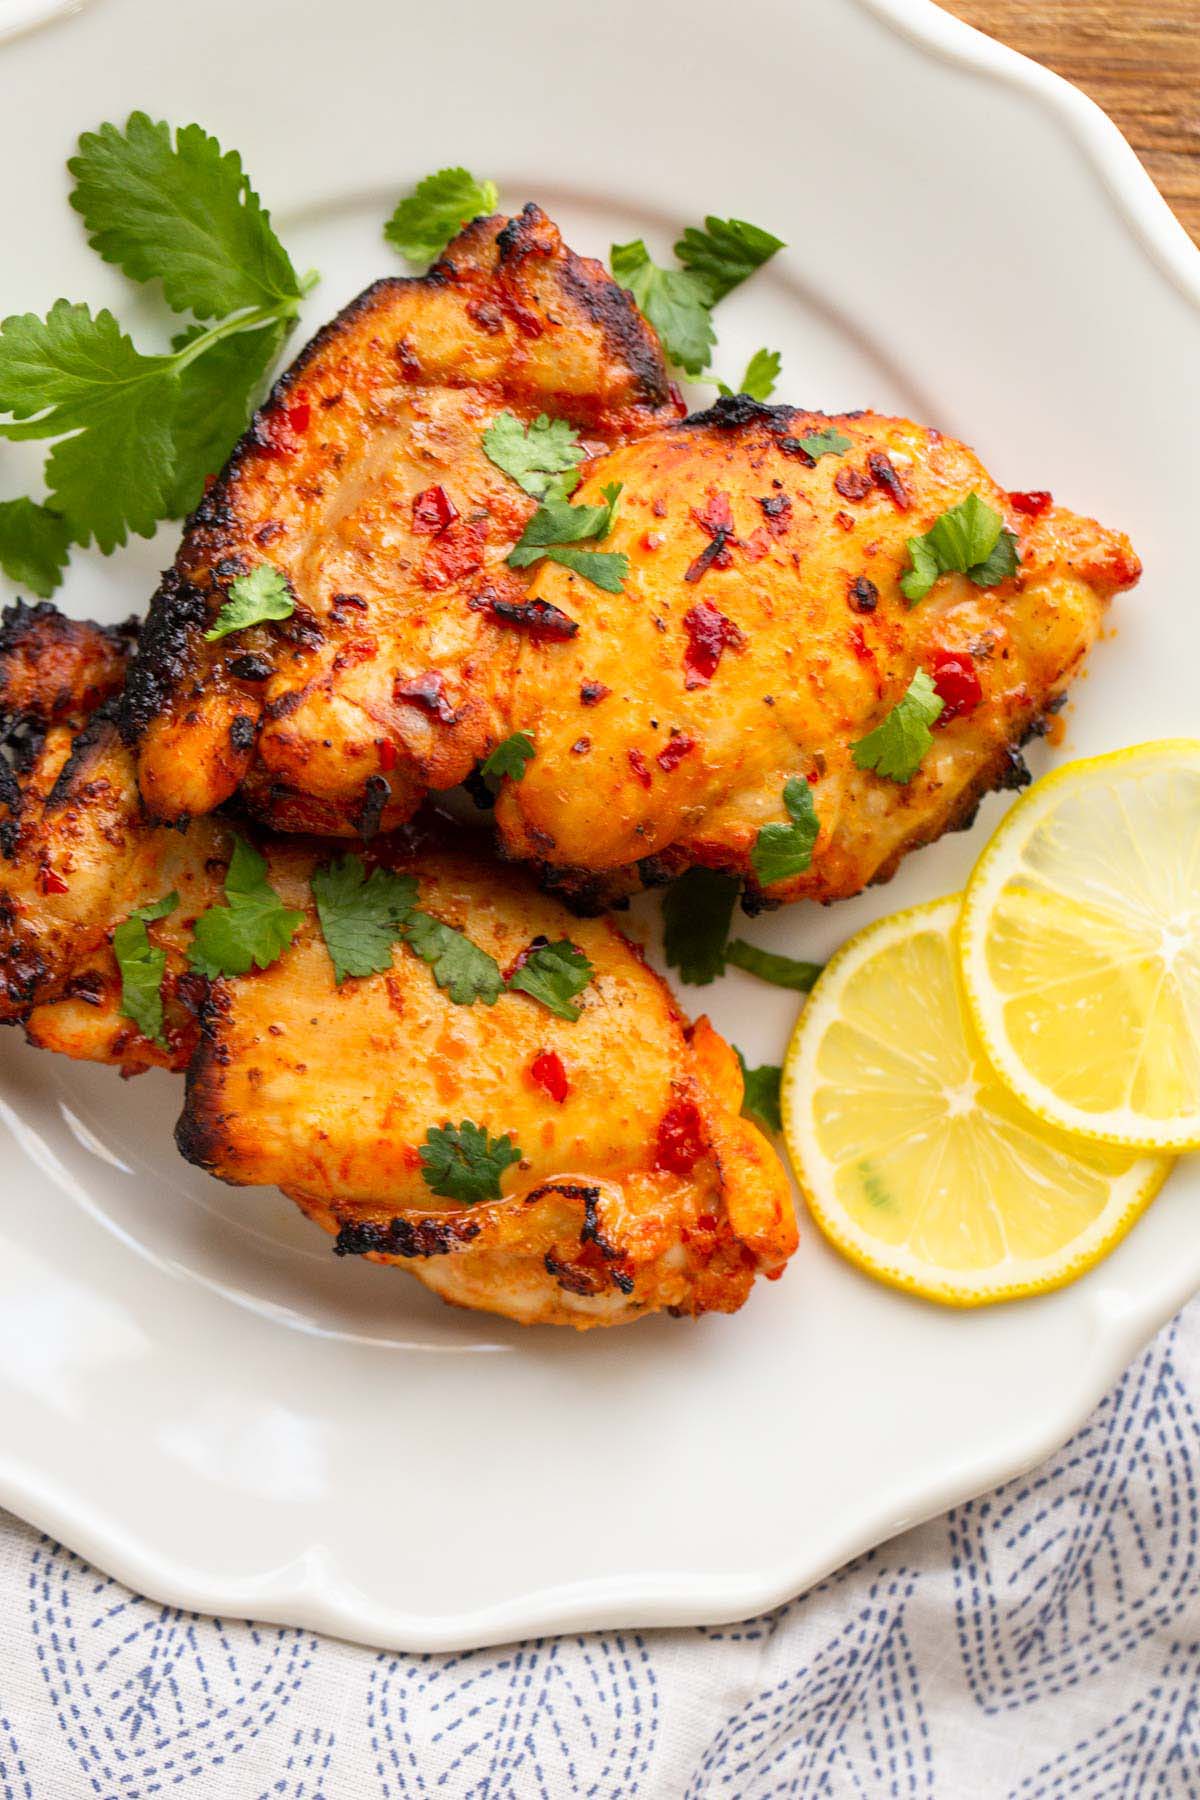 Harissa chicken on a plate with lemon slices.